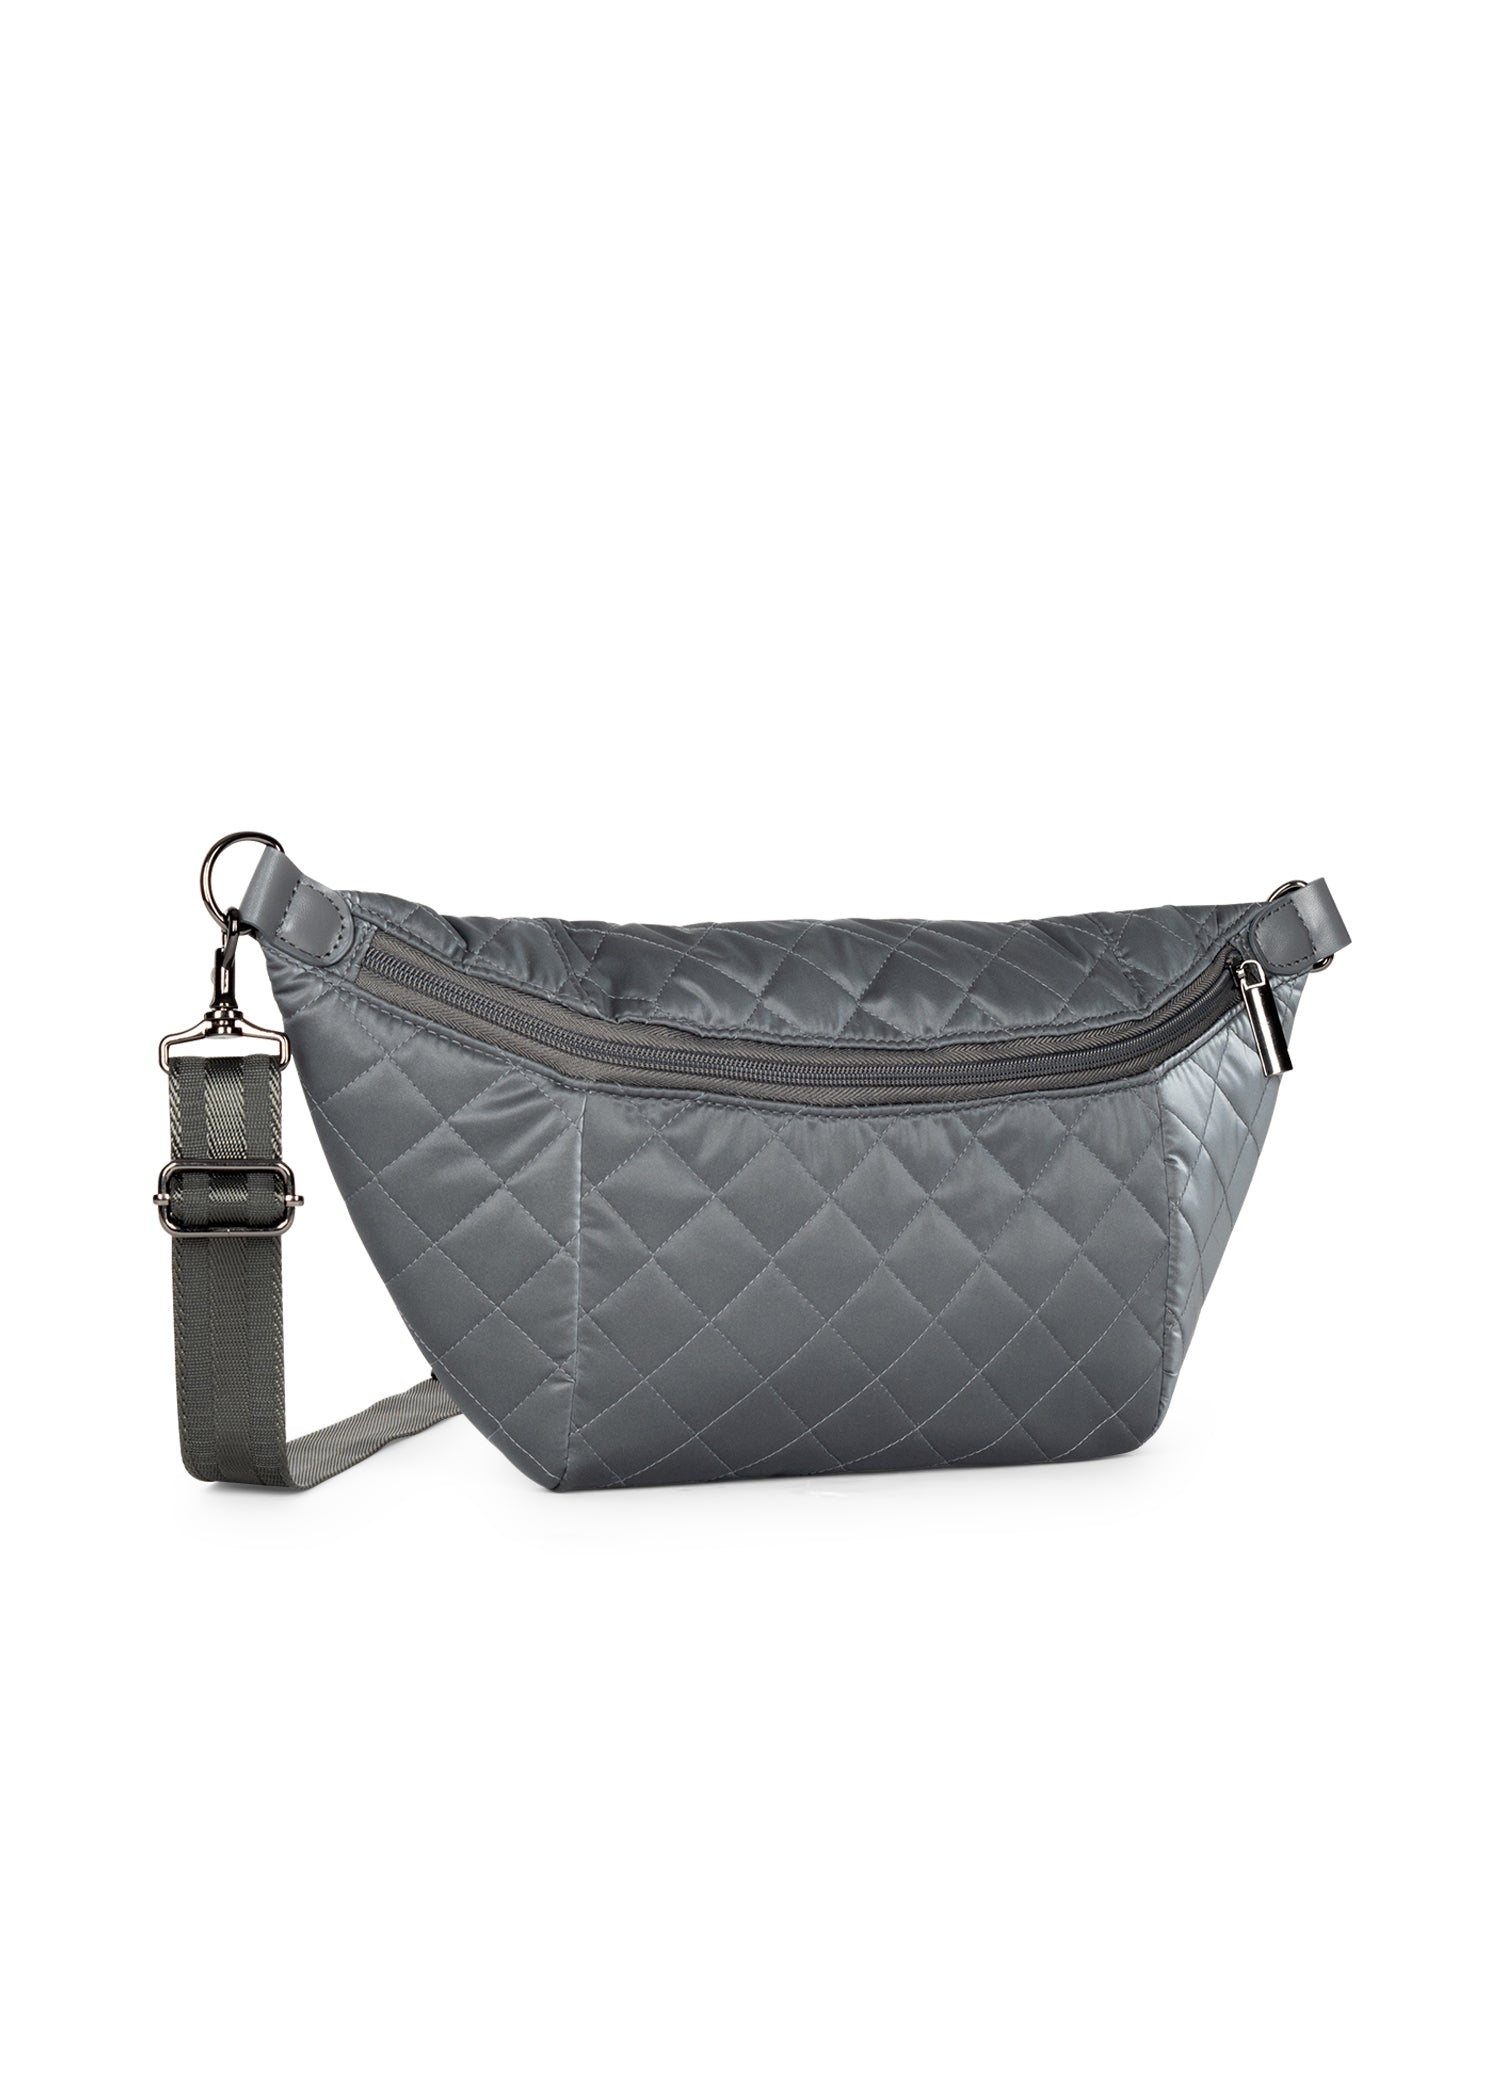 The Emily Shadow Sling Bag